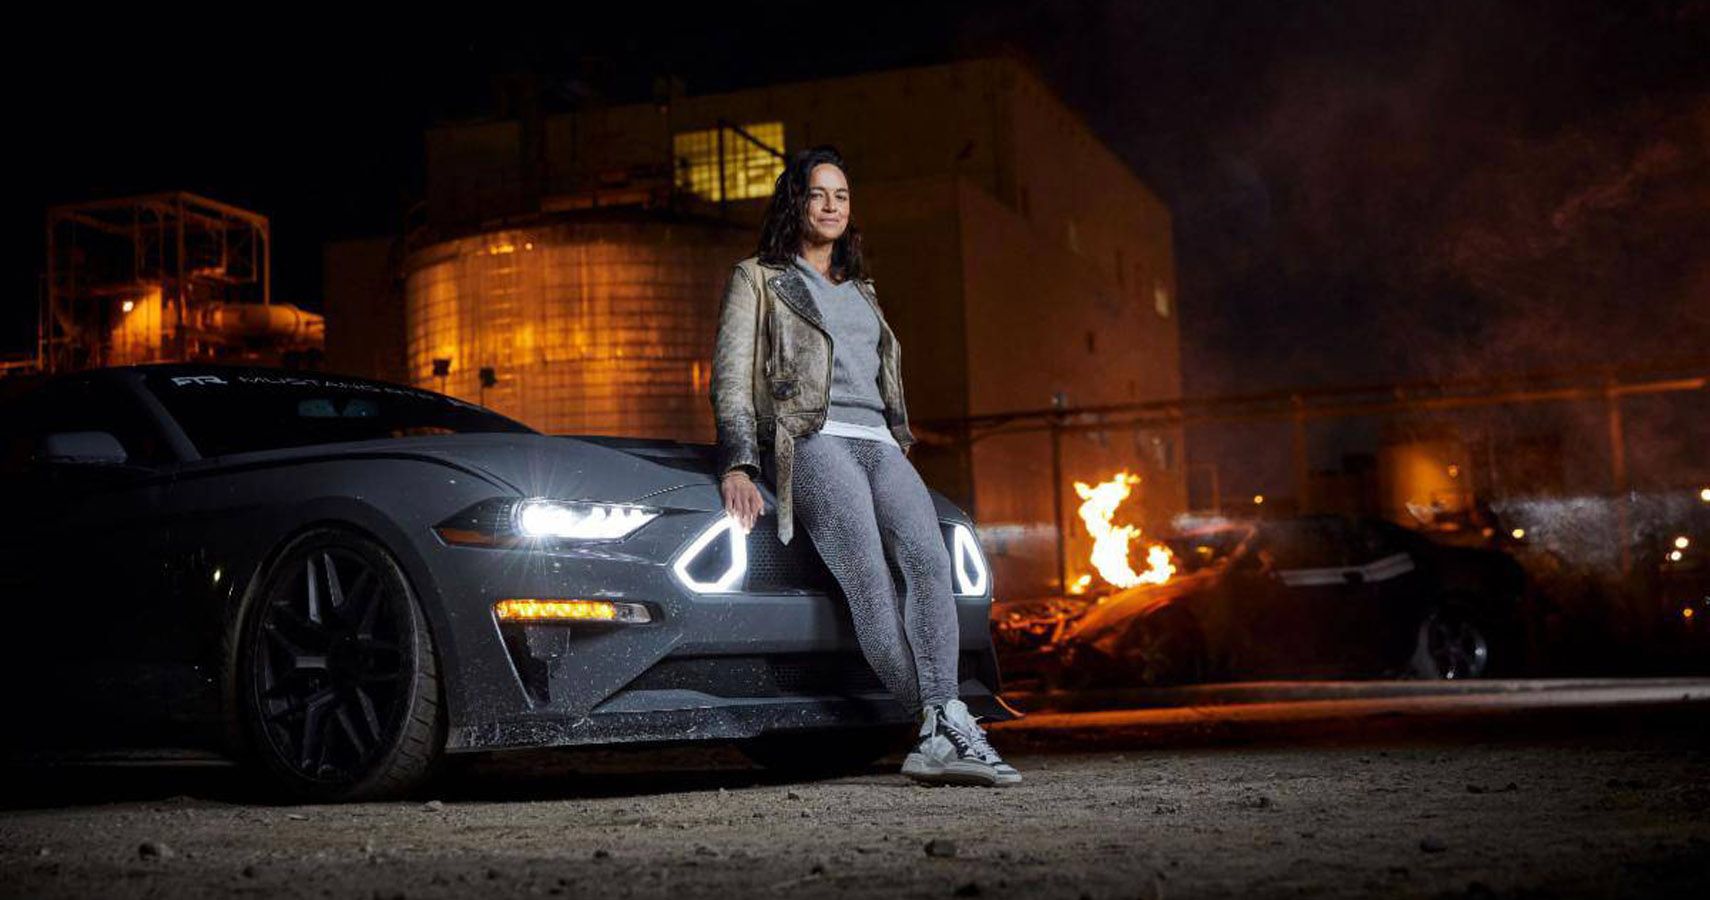 Fast And Furious Star Michelle Rodriguez Shifts Gears To Host Driving